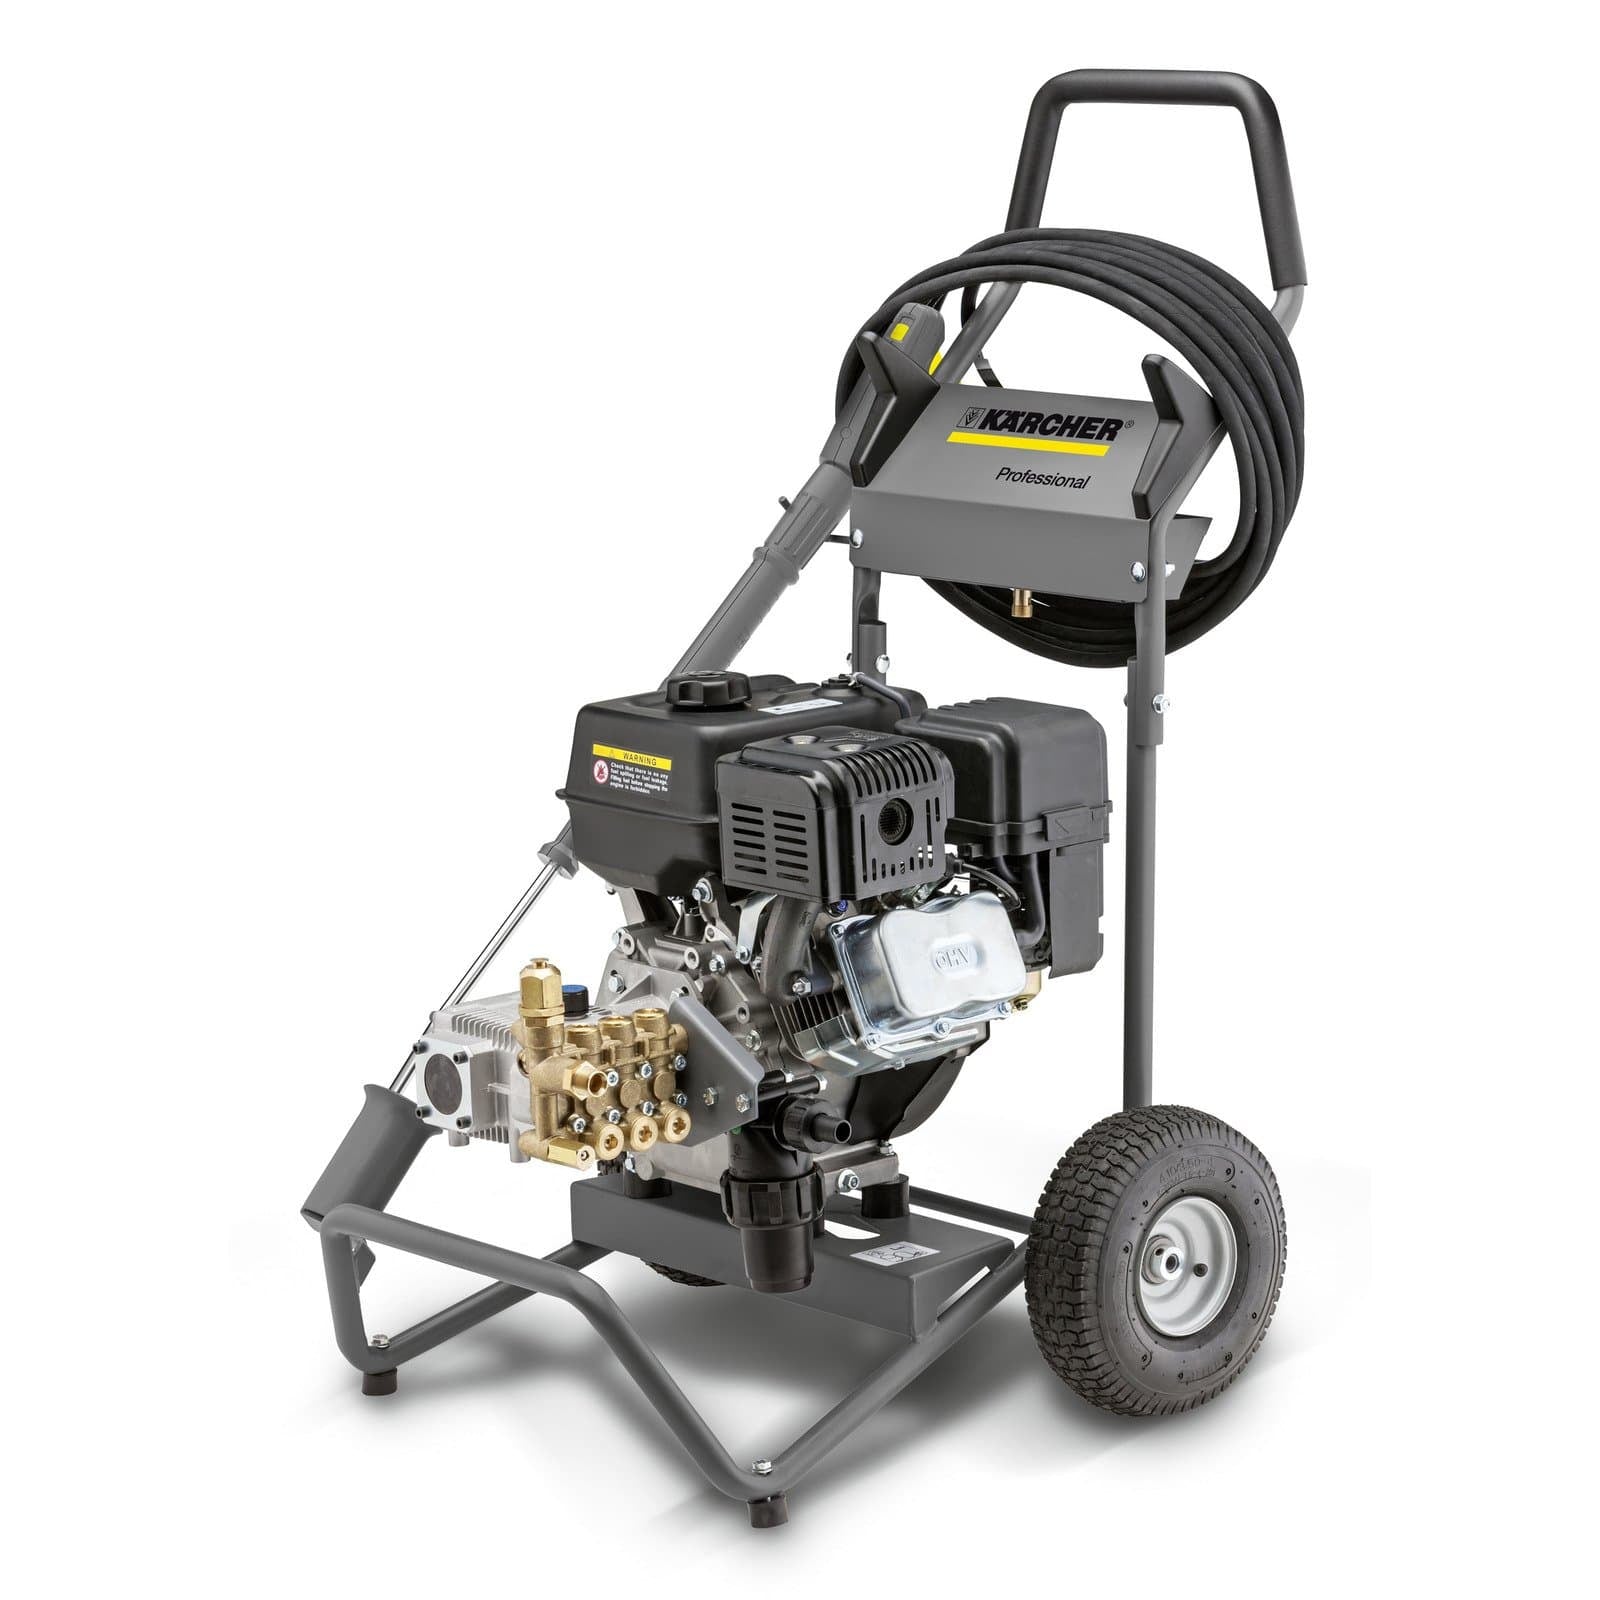 Karcher Gasoline High Pressure Washer 200 Bar - HD 7/20 G Classic | Supply Master | Accra, Ghana Tools Building Steel Engineering Hardware tool